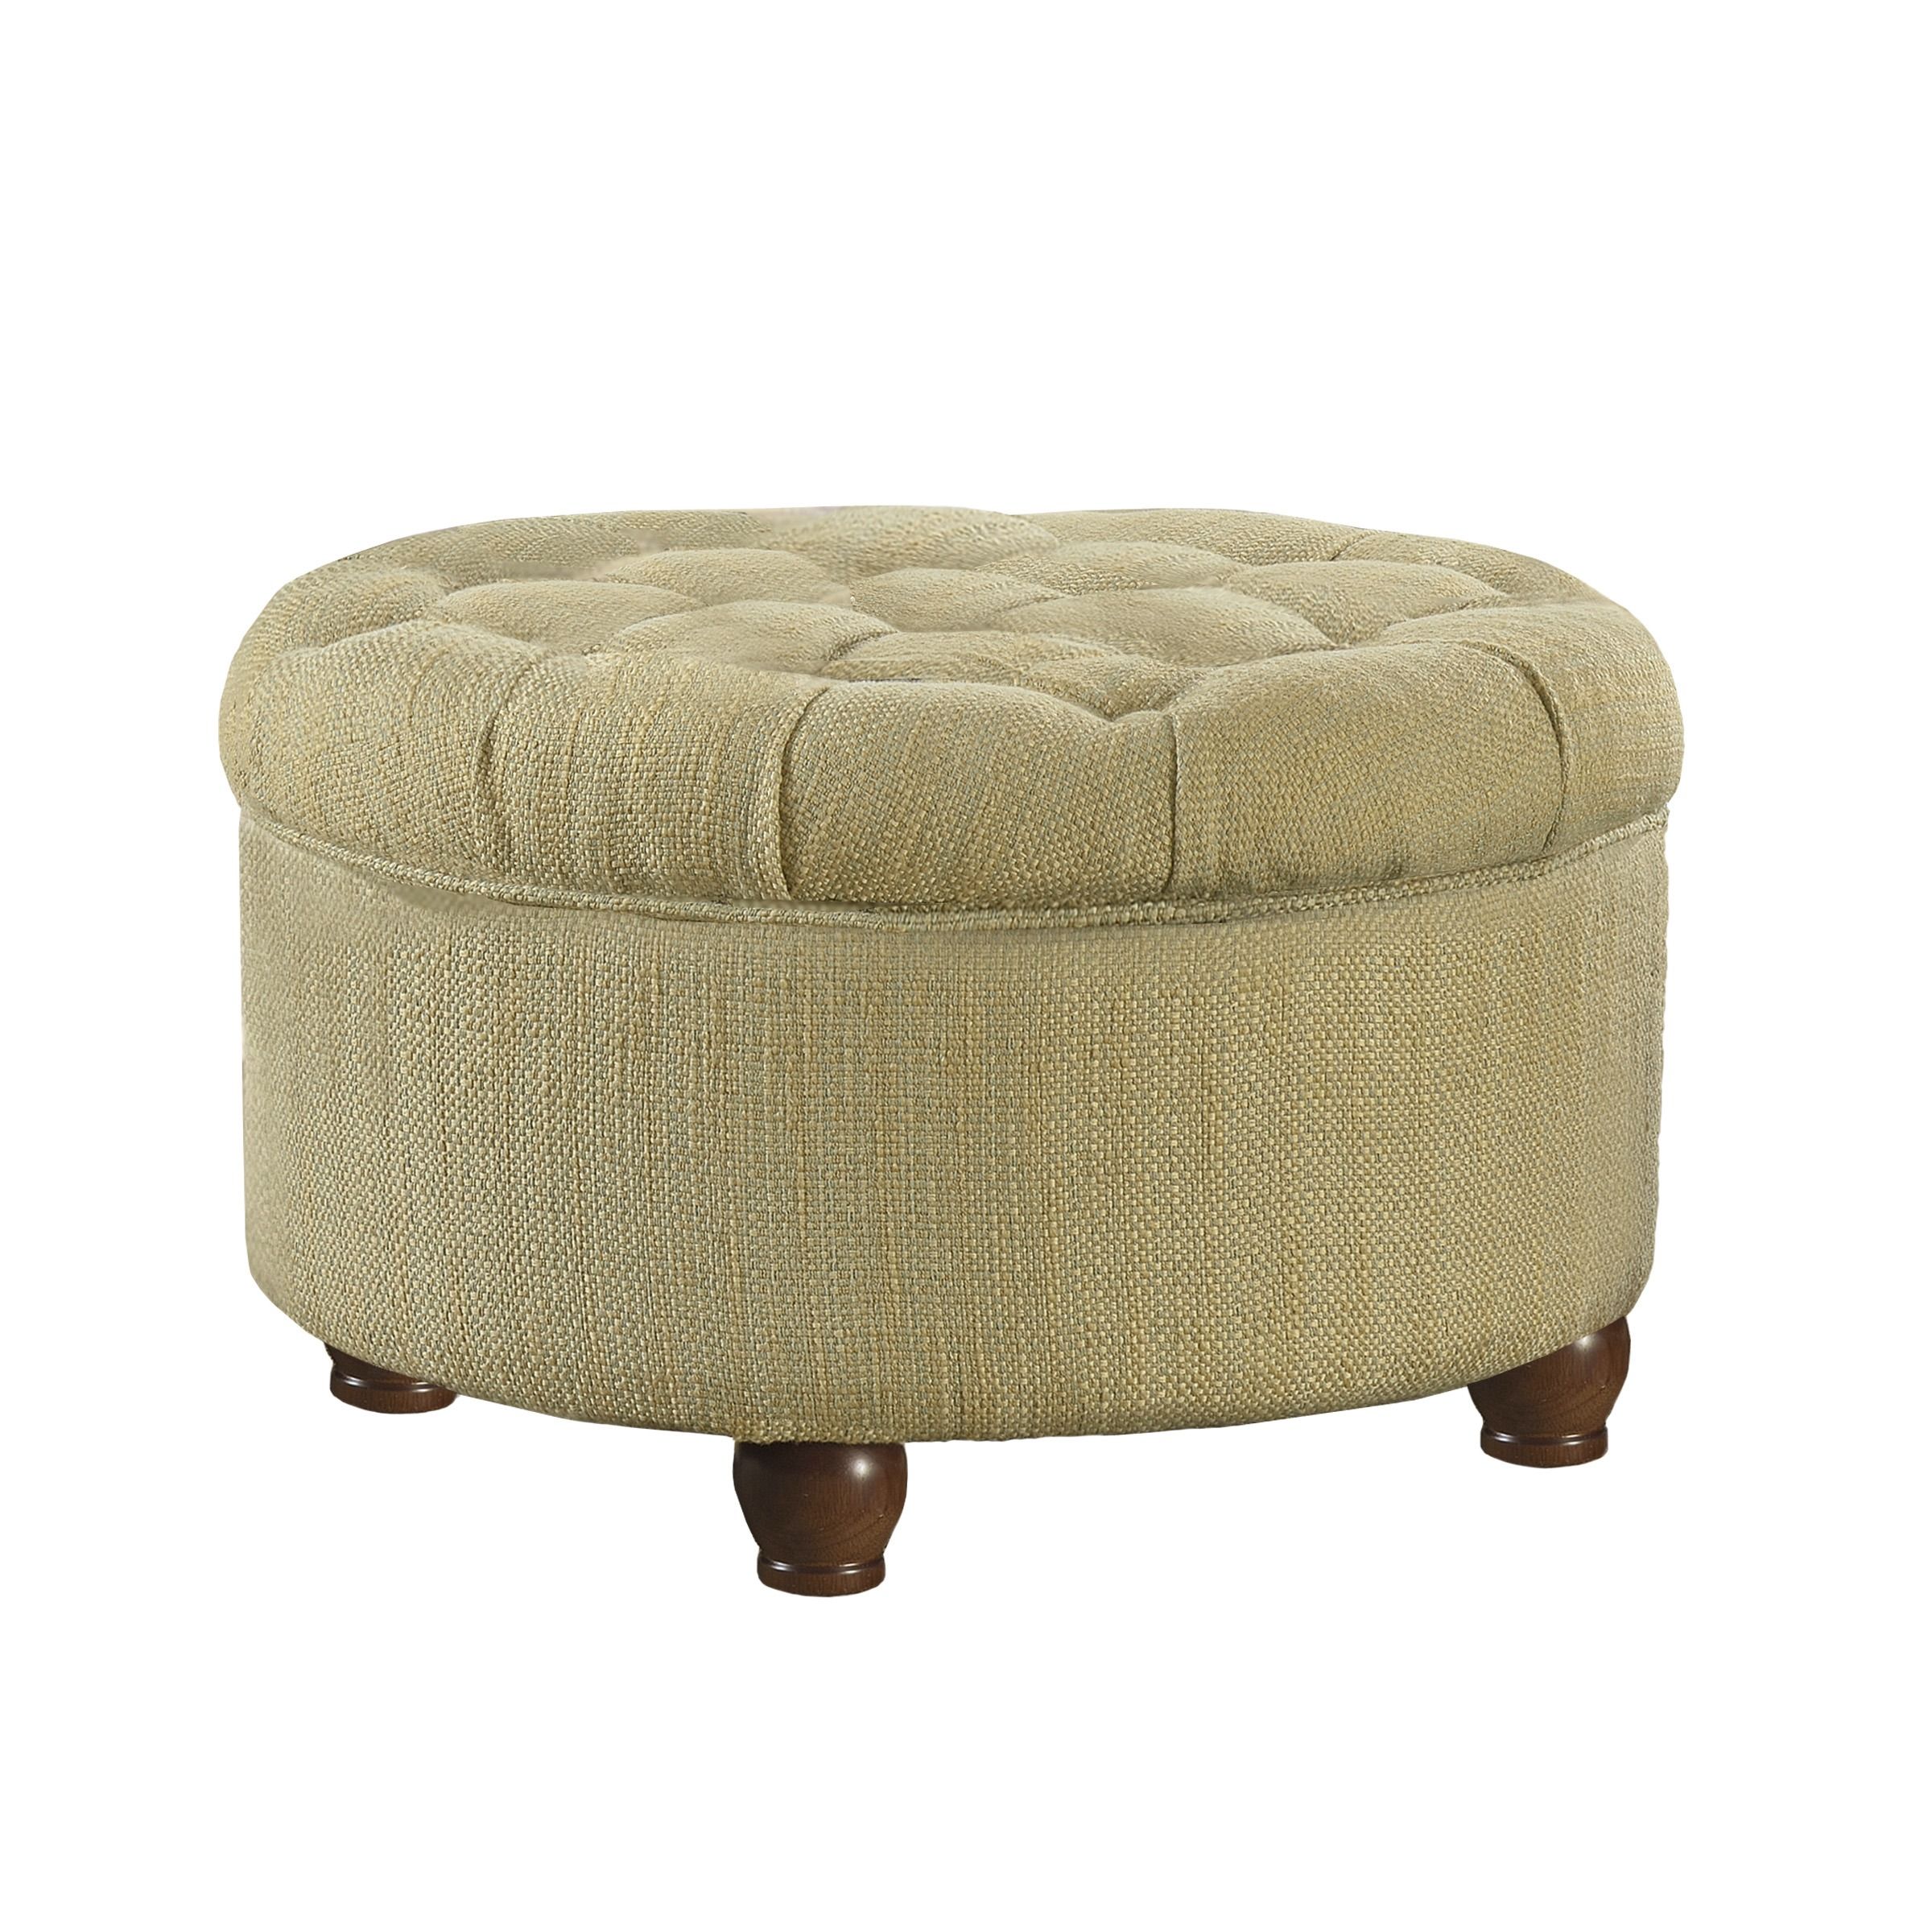 Benzara Fabric Upholstered Wooden Ottoman With Tufted Lift Off Lid Pertaining To Multi Color Fabric Storage Ottomans (View 4 of 20)